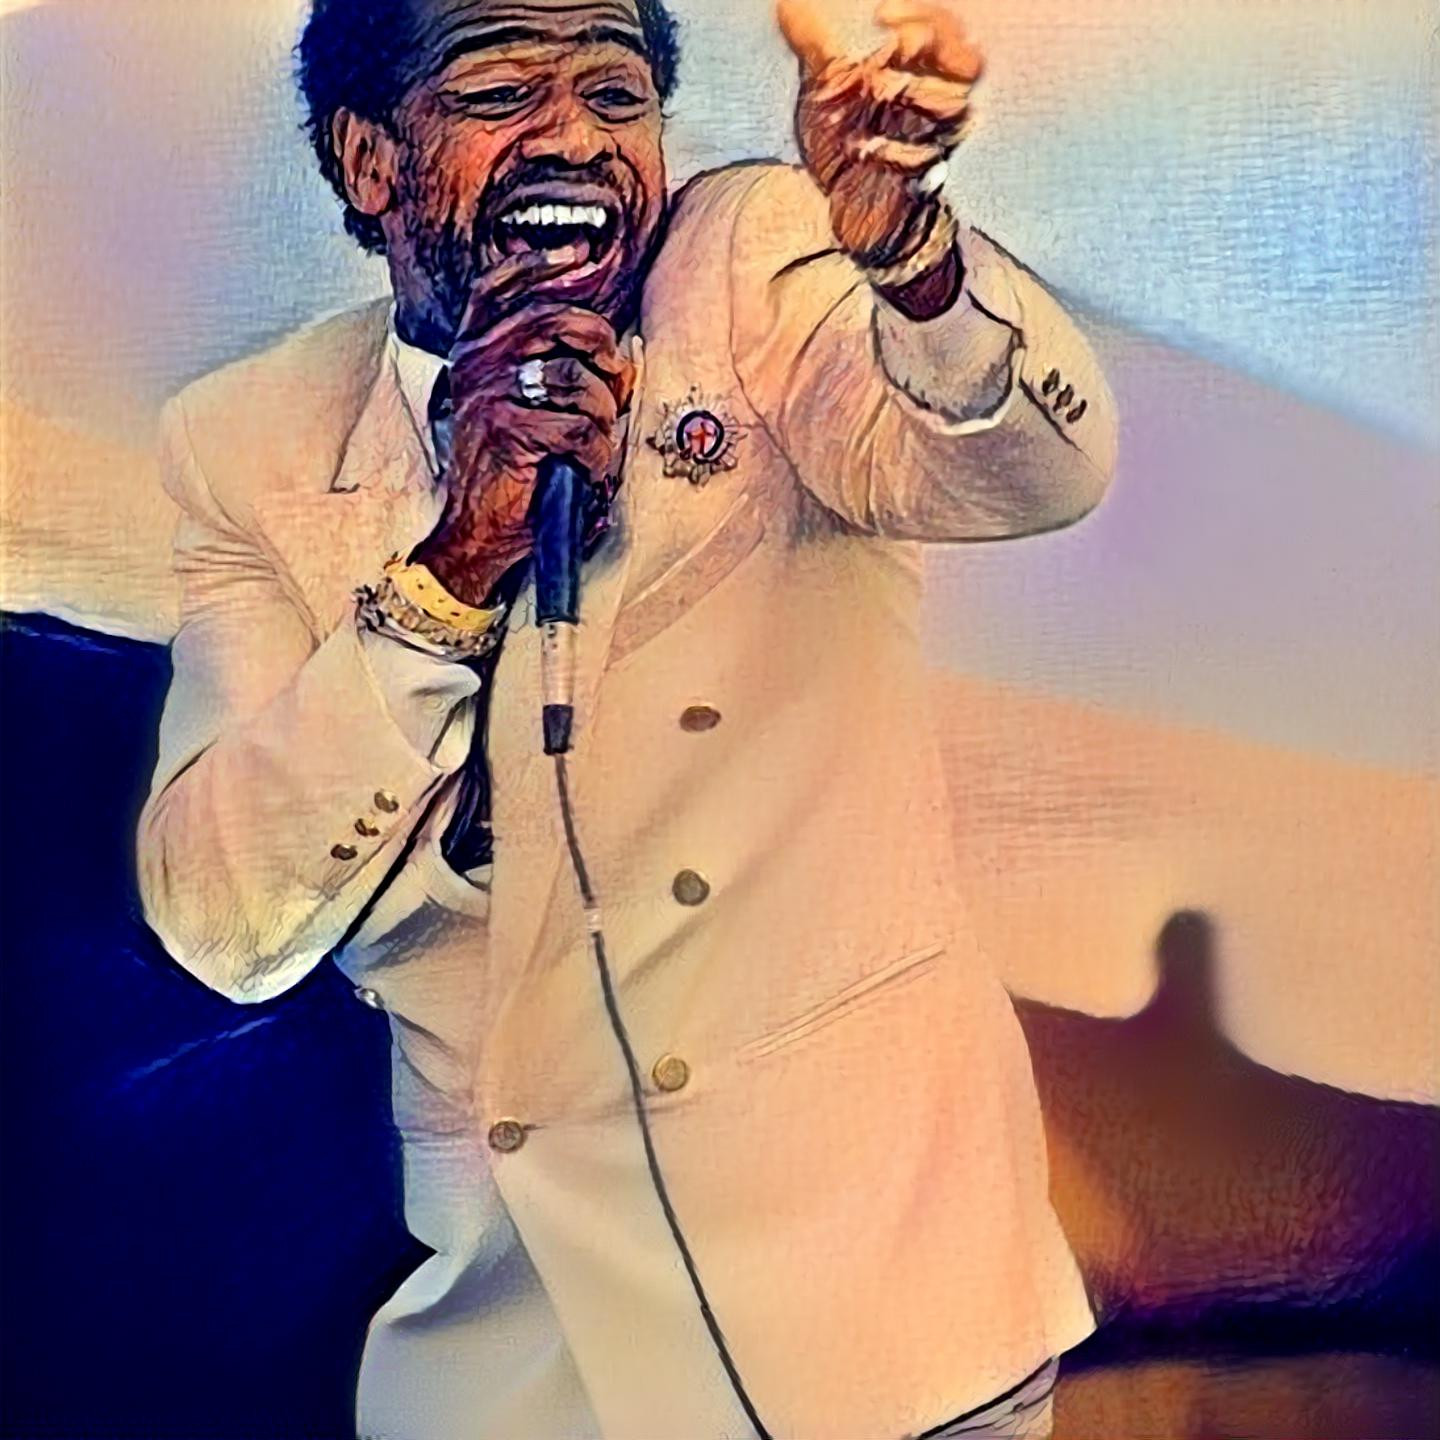 Al Green laying down Love and Happiness